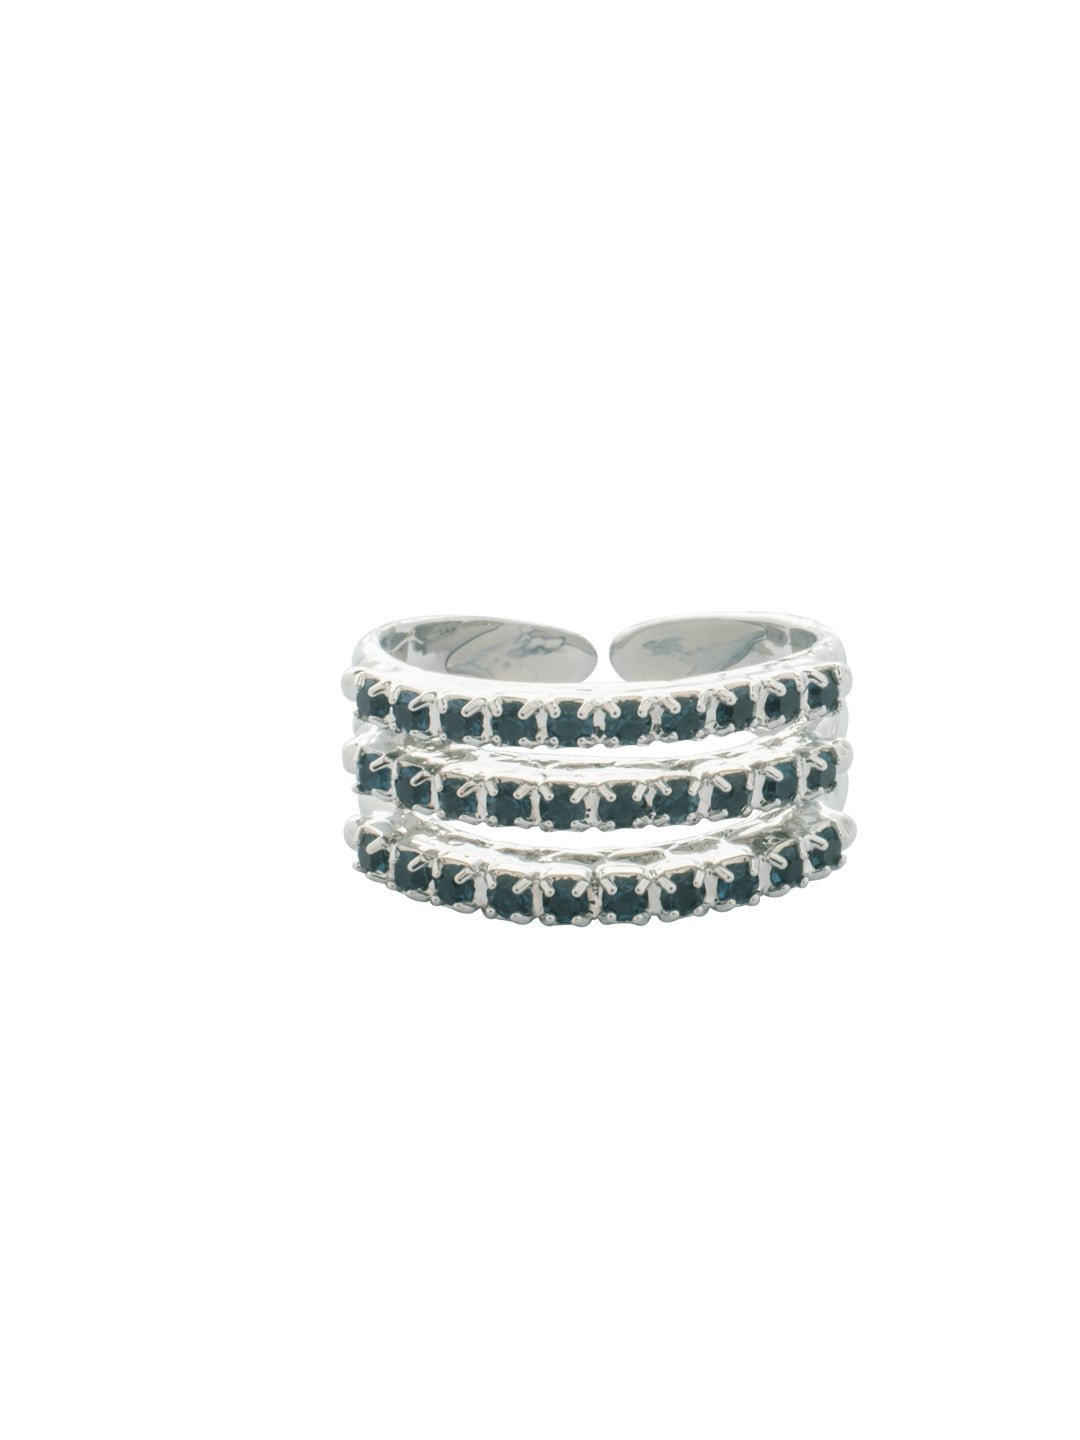 Rosamund Stacked Ring - RFL13PDASP - <p>The Rosamund Stacked Ring features embellished rhinestone bands stacked as one adjustable ring. From Sorrelli's Aspen SKY collection in our Palladium finish.</p>